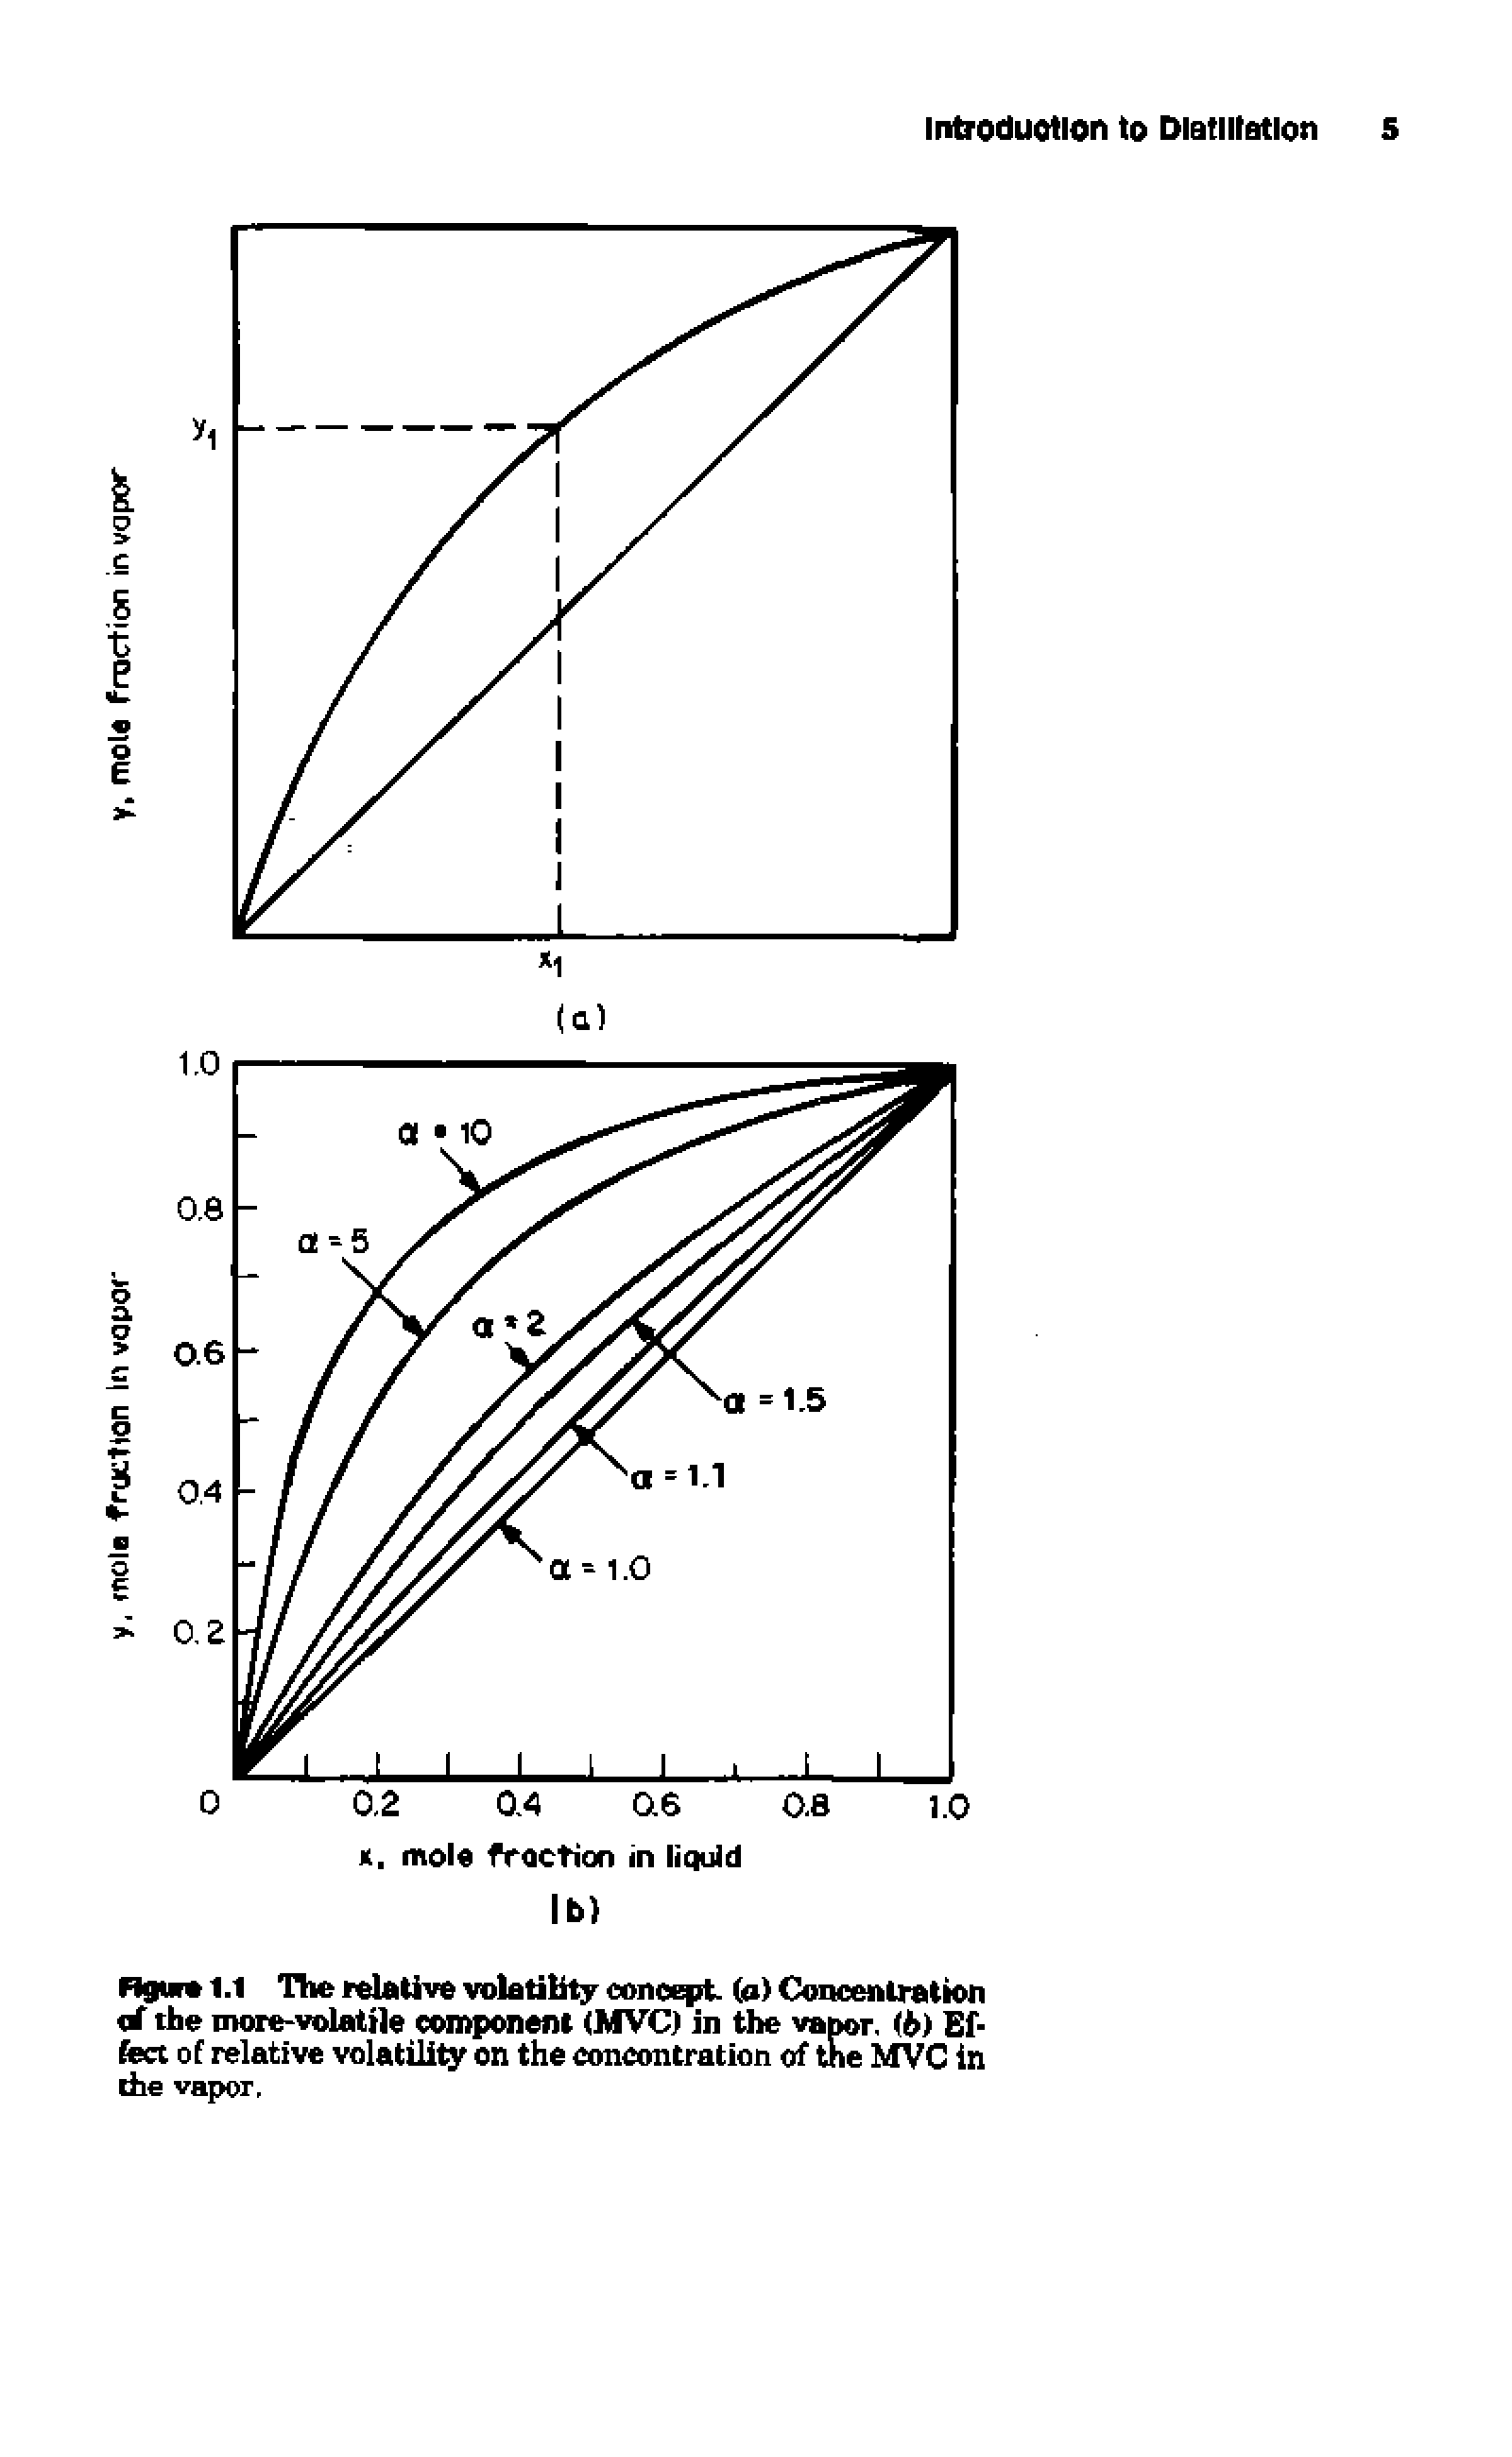 Figure 1.1 Hie relative volatility concert, (a) Concentration the more-volatile component (MVC) in the vapor. (6) Effect of relative volatility on the concentration of the MVC in the vapor.